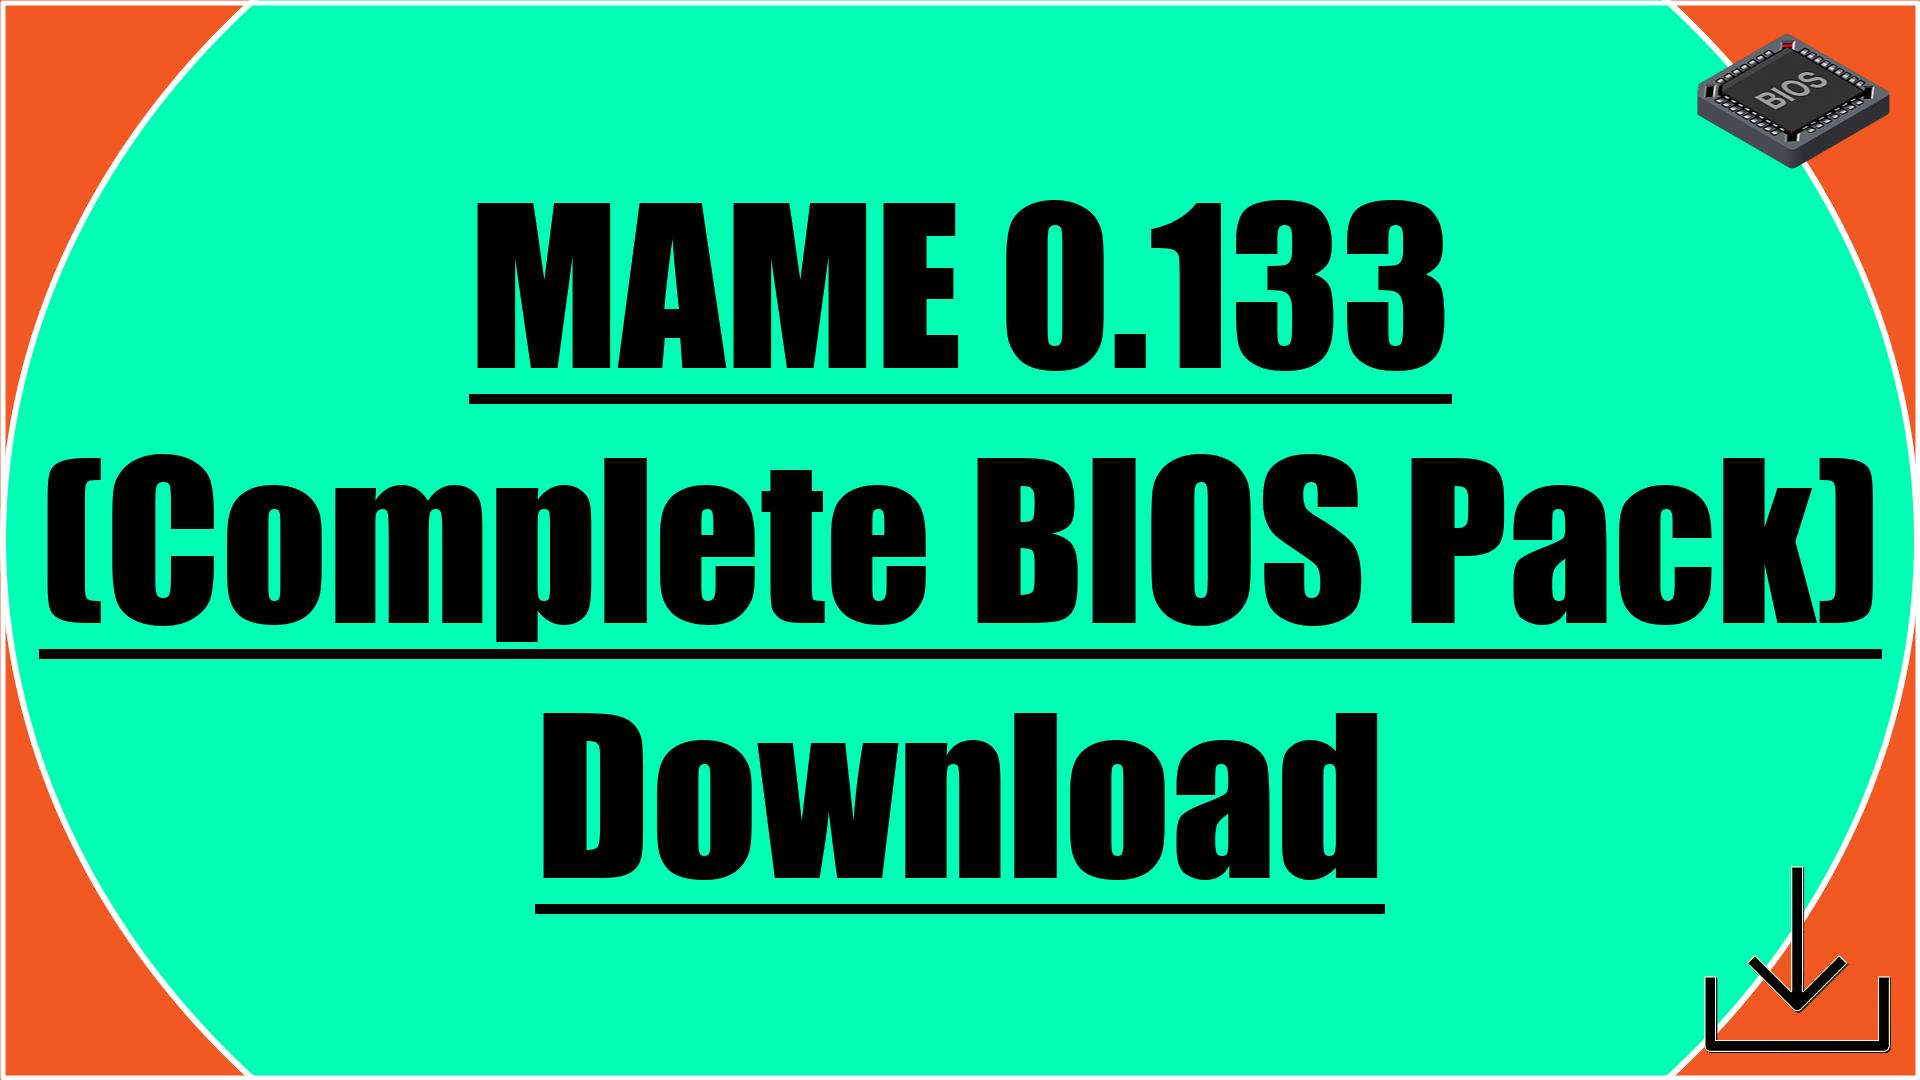 MAME 0.133 (Complete BIOS Pack) Download